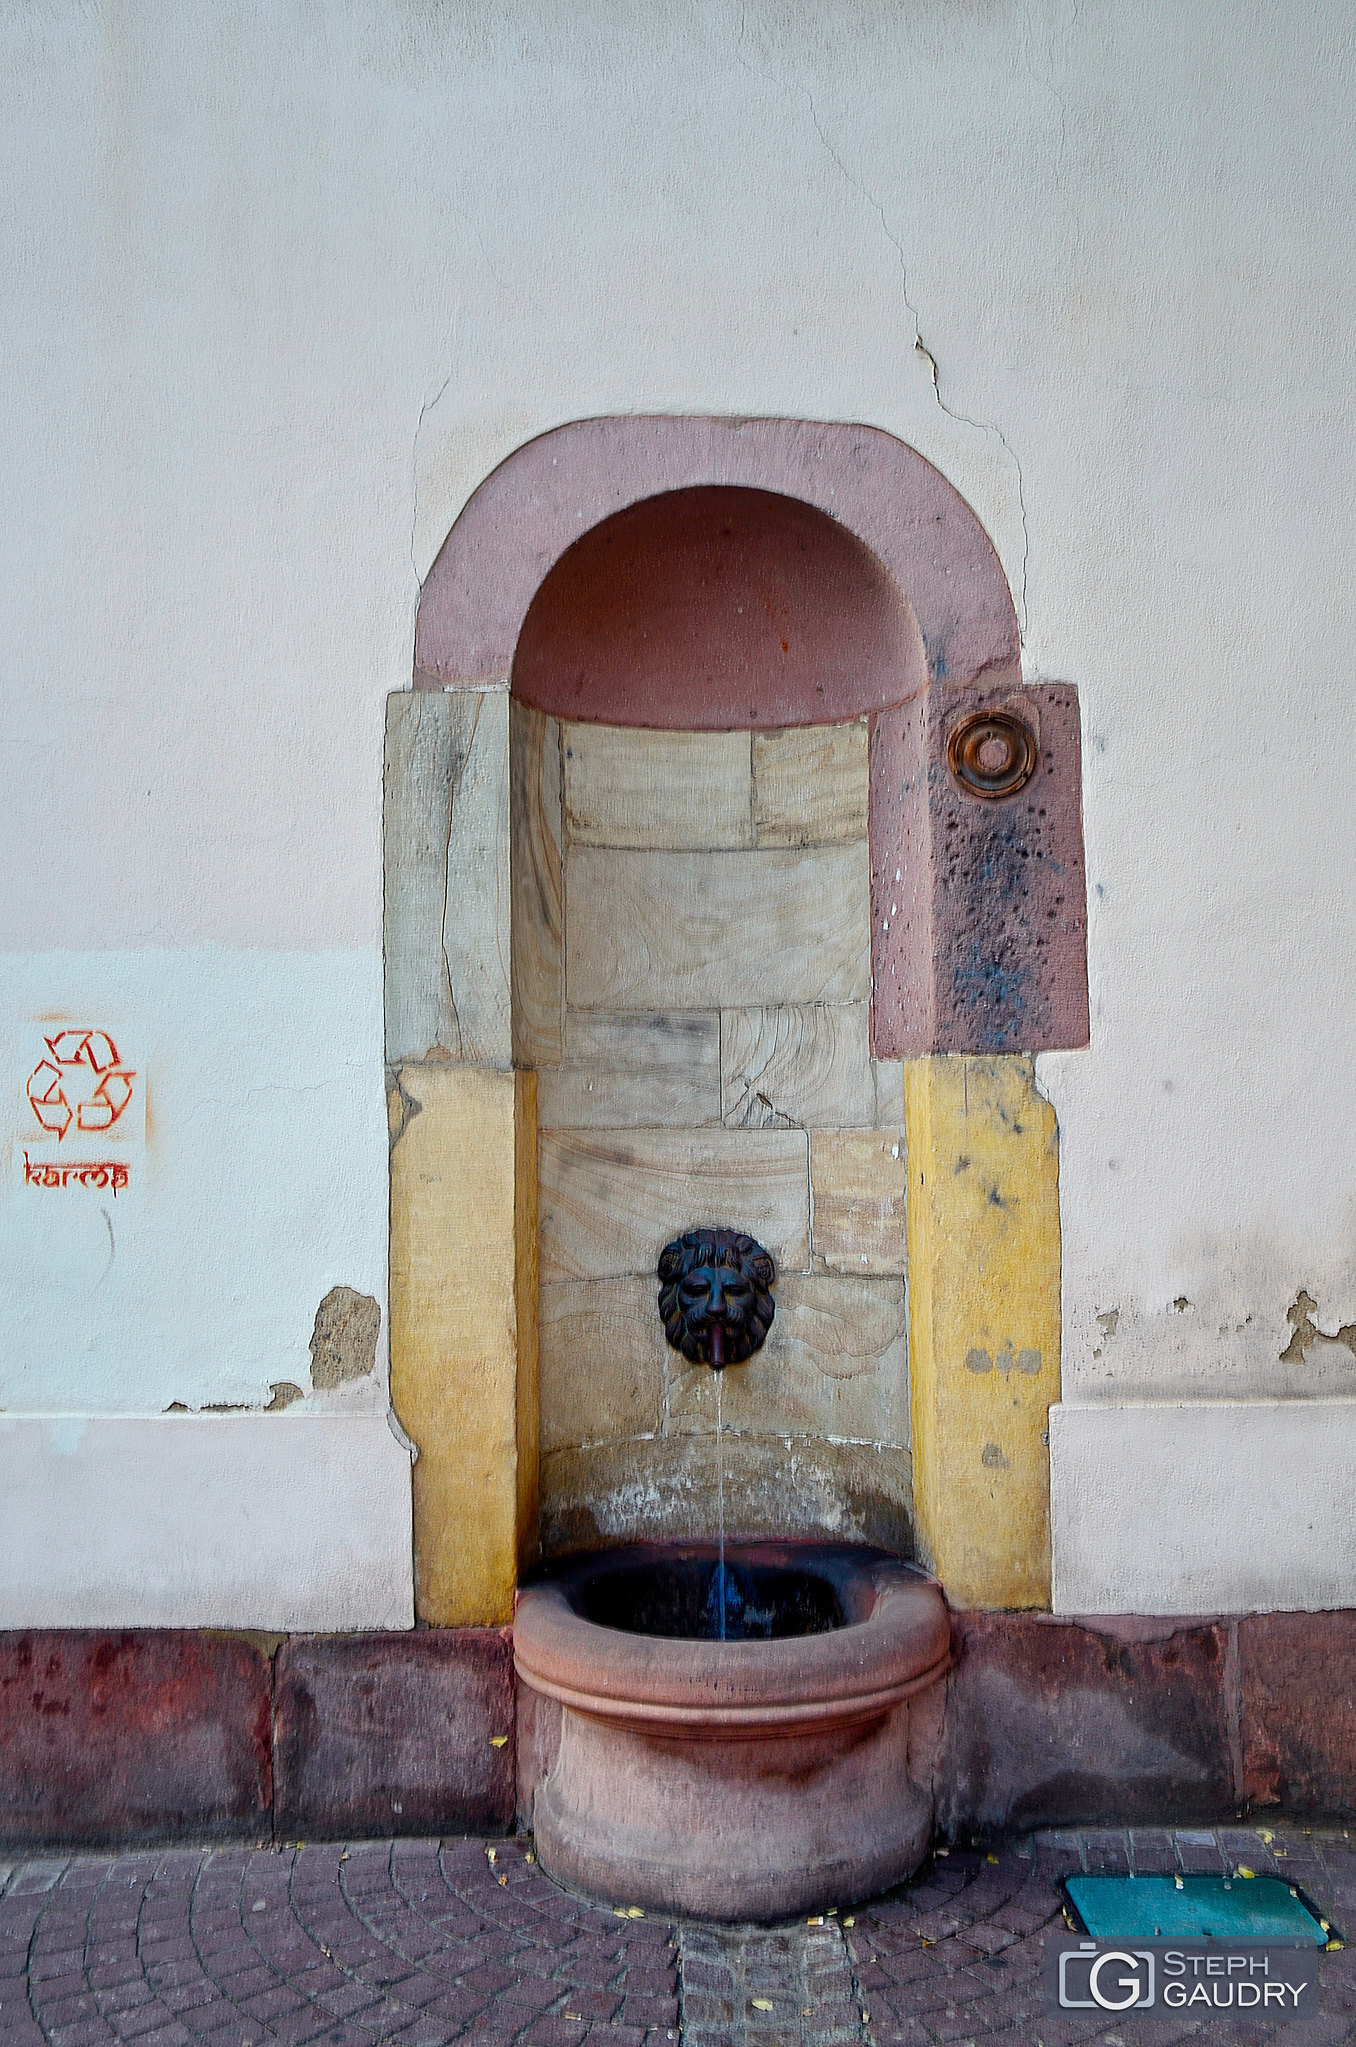 Fontaine qui recycle le karma?